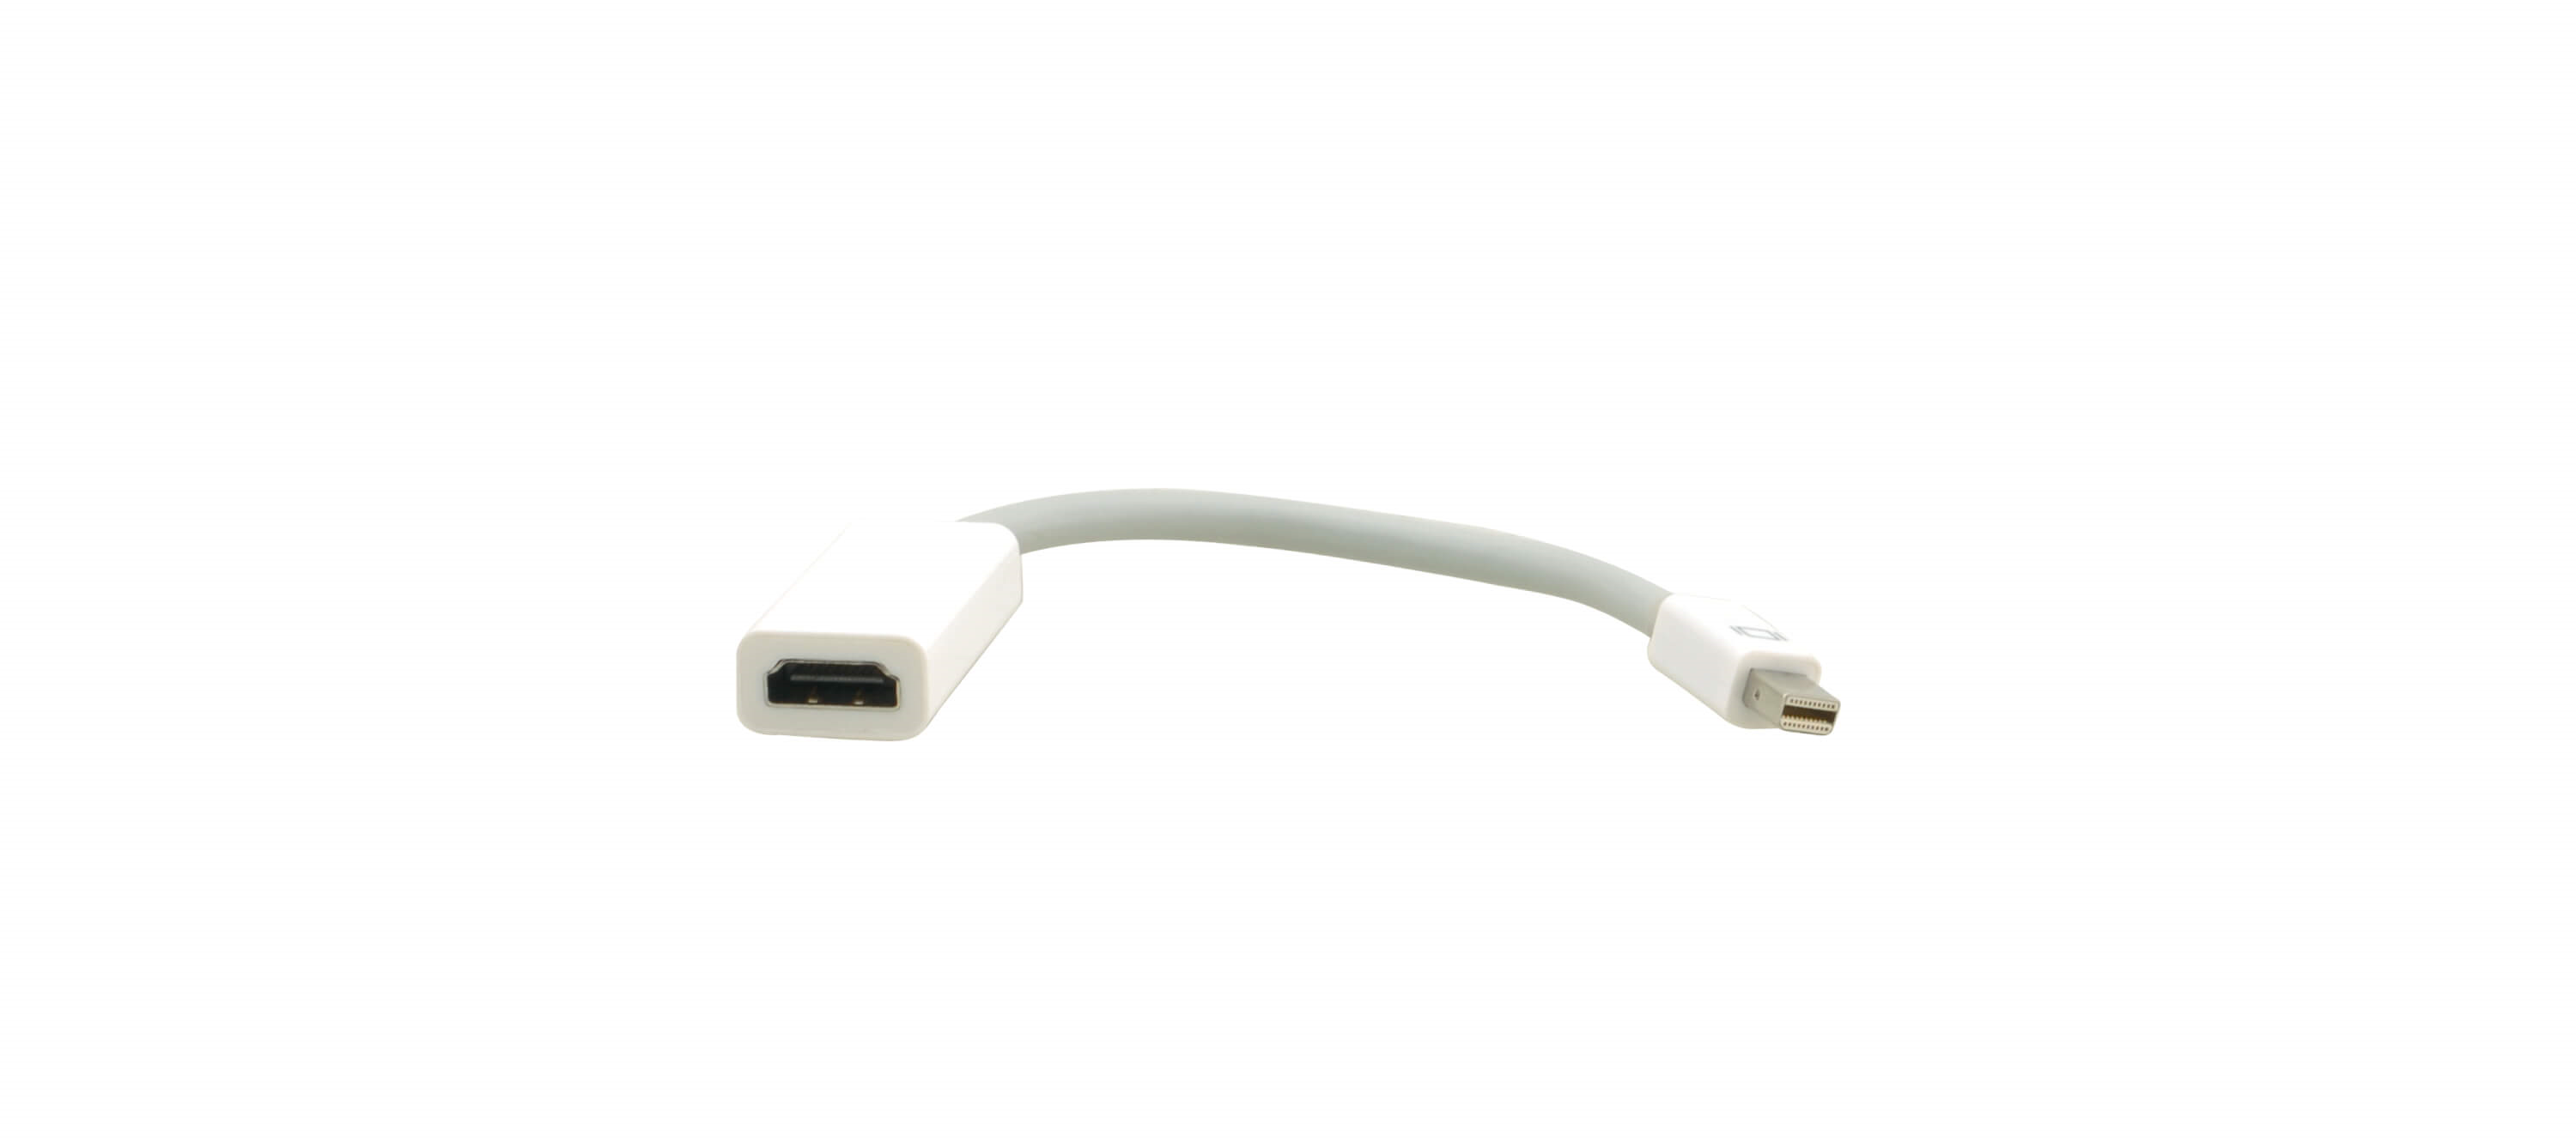 ADC-MDP/HF3 Mini DisplayPort (M) to HDMI (F) Adapter cable